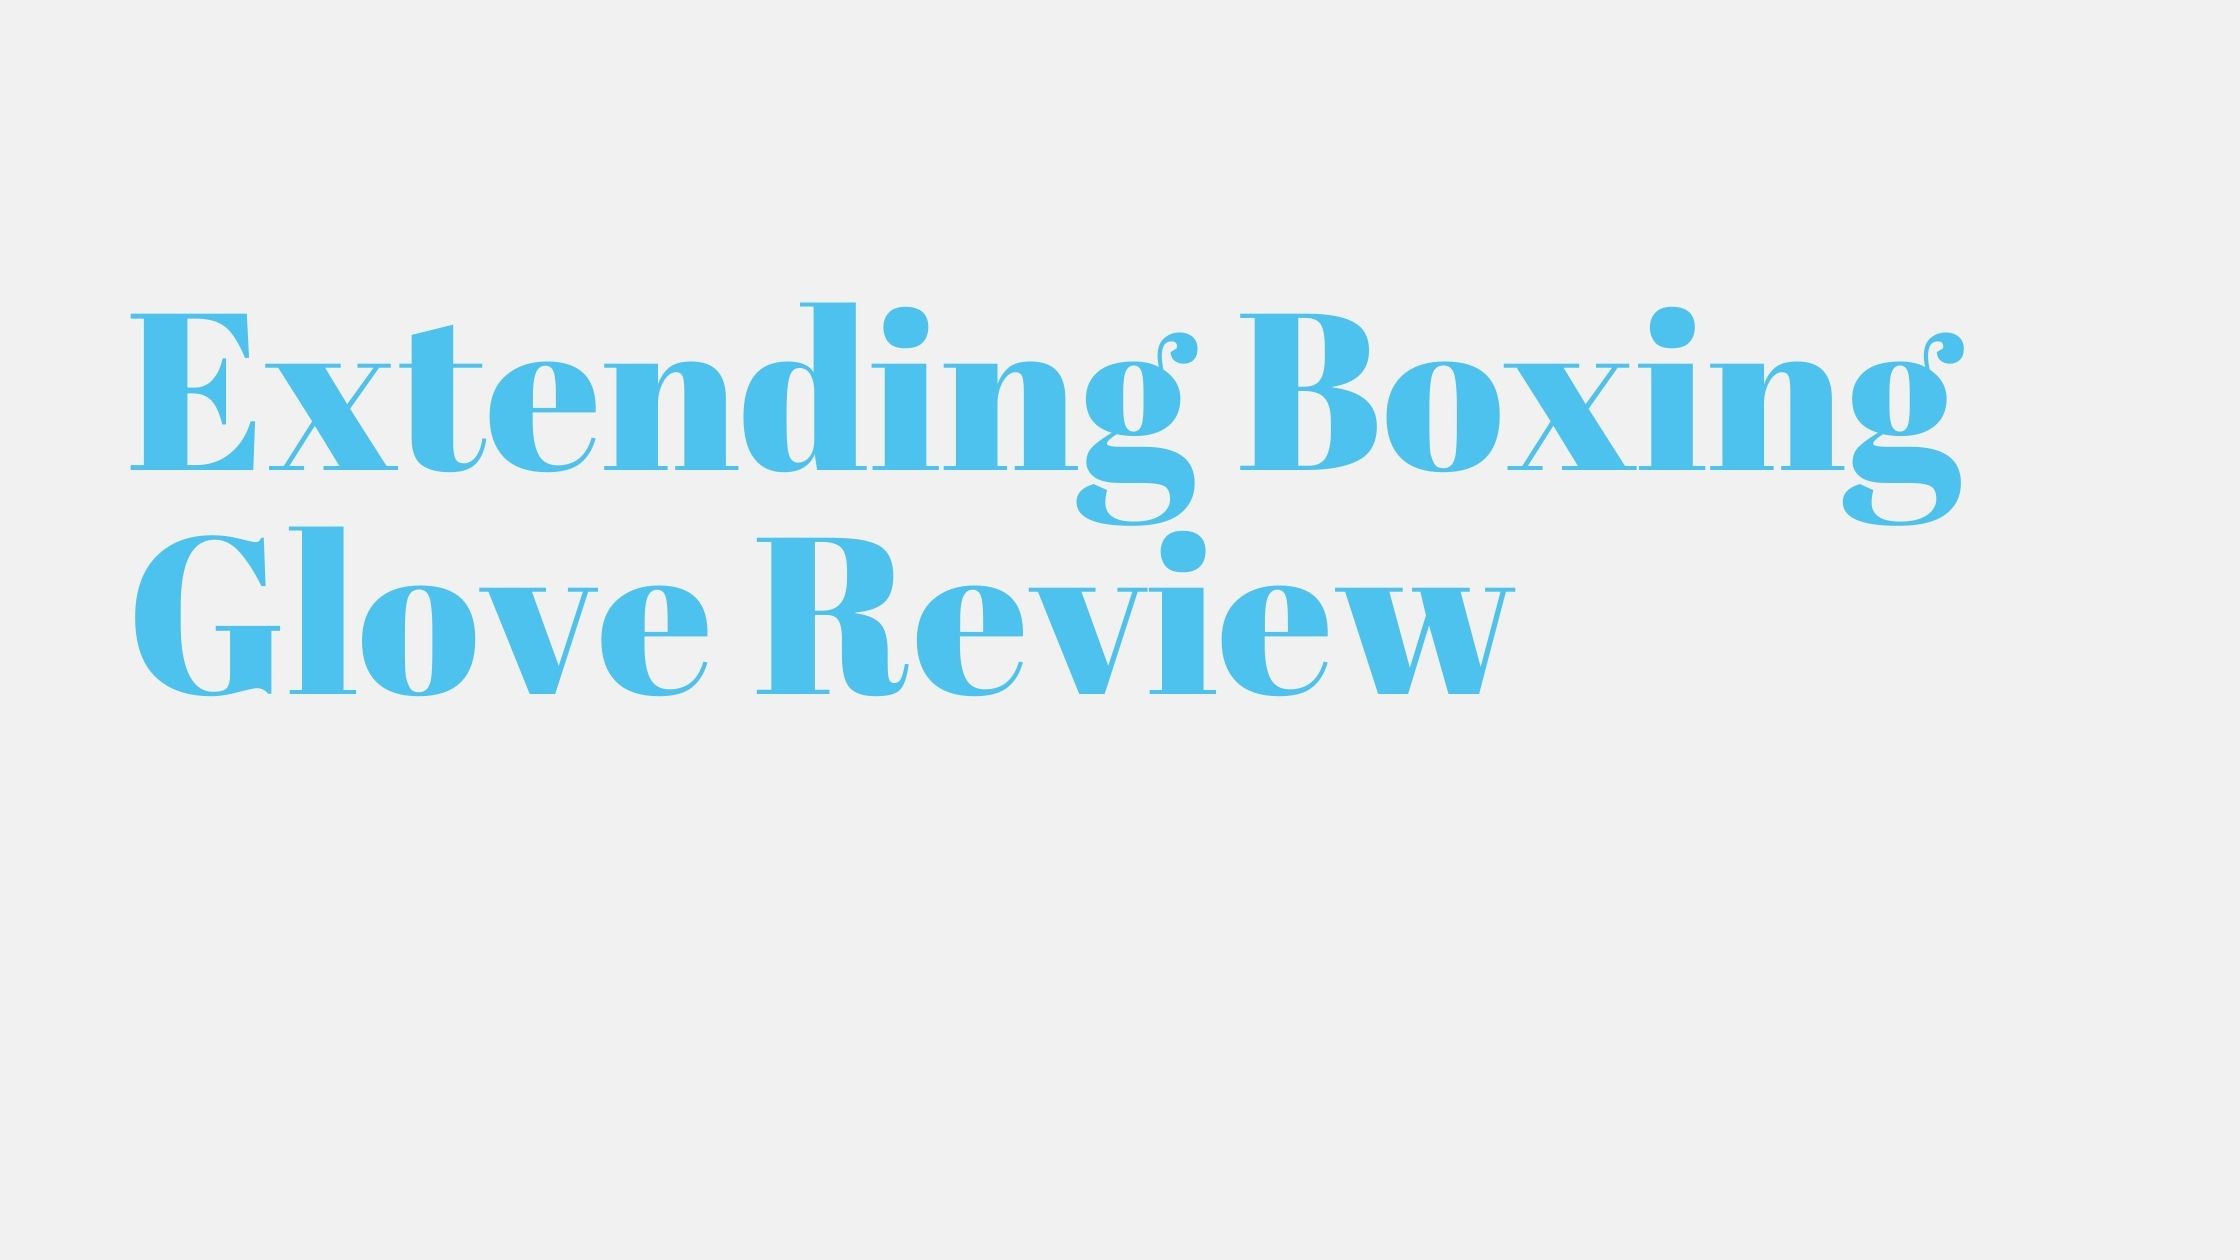 You are currently viewing Extending Boxing Glove Review